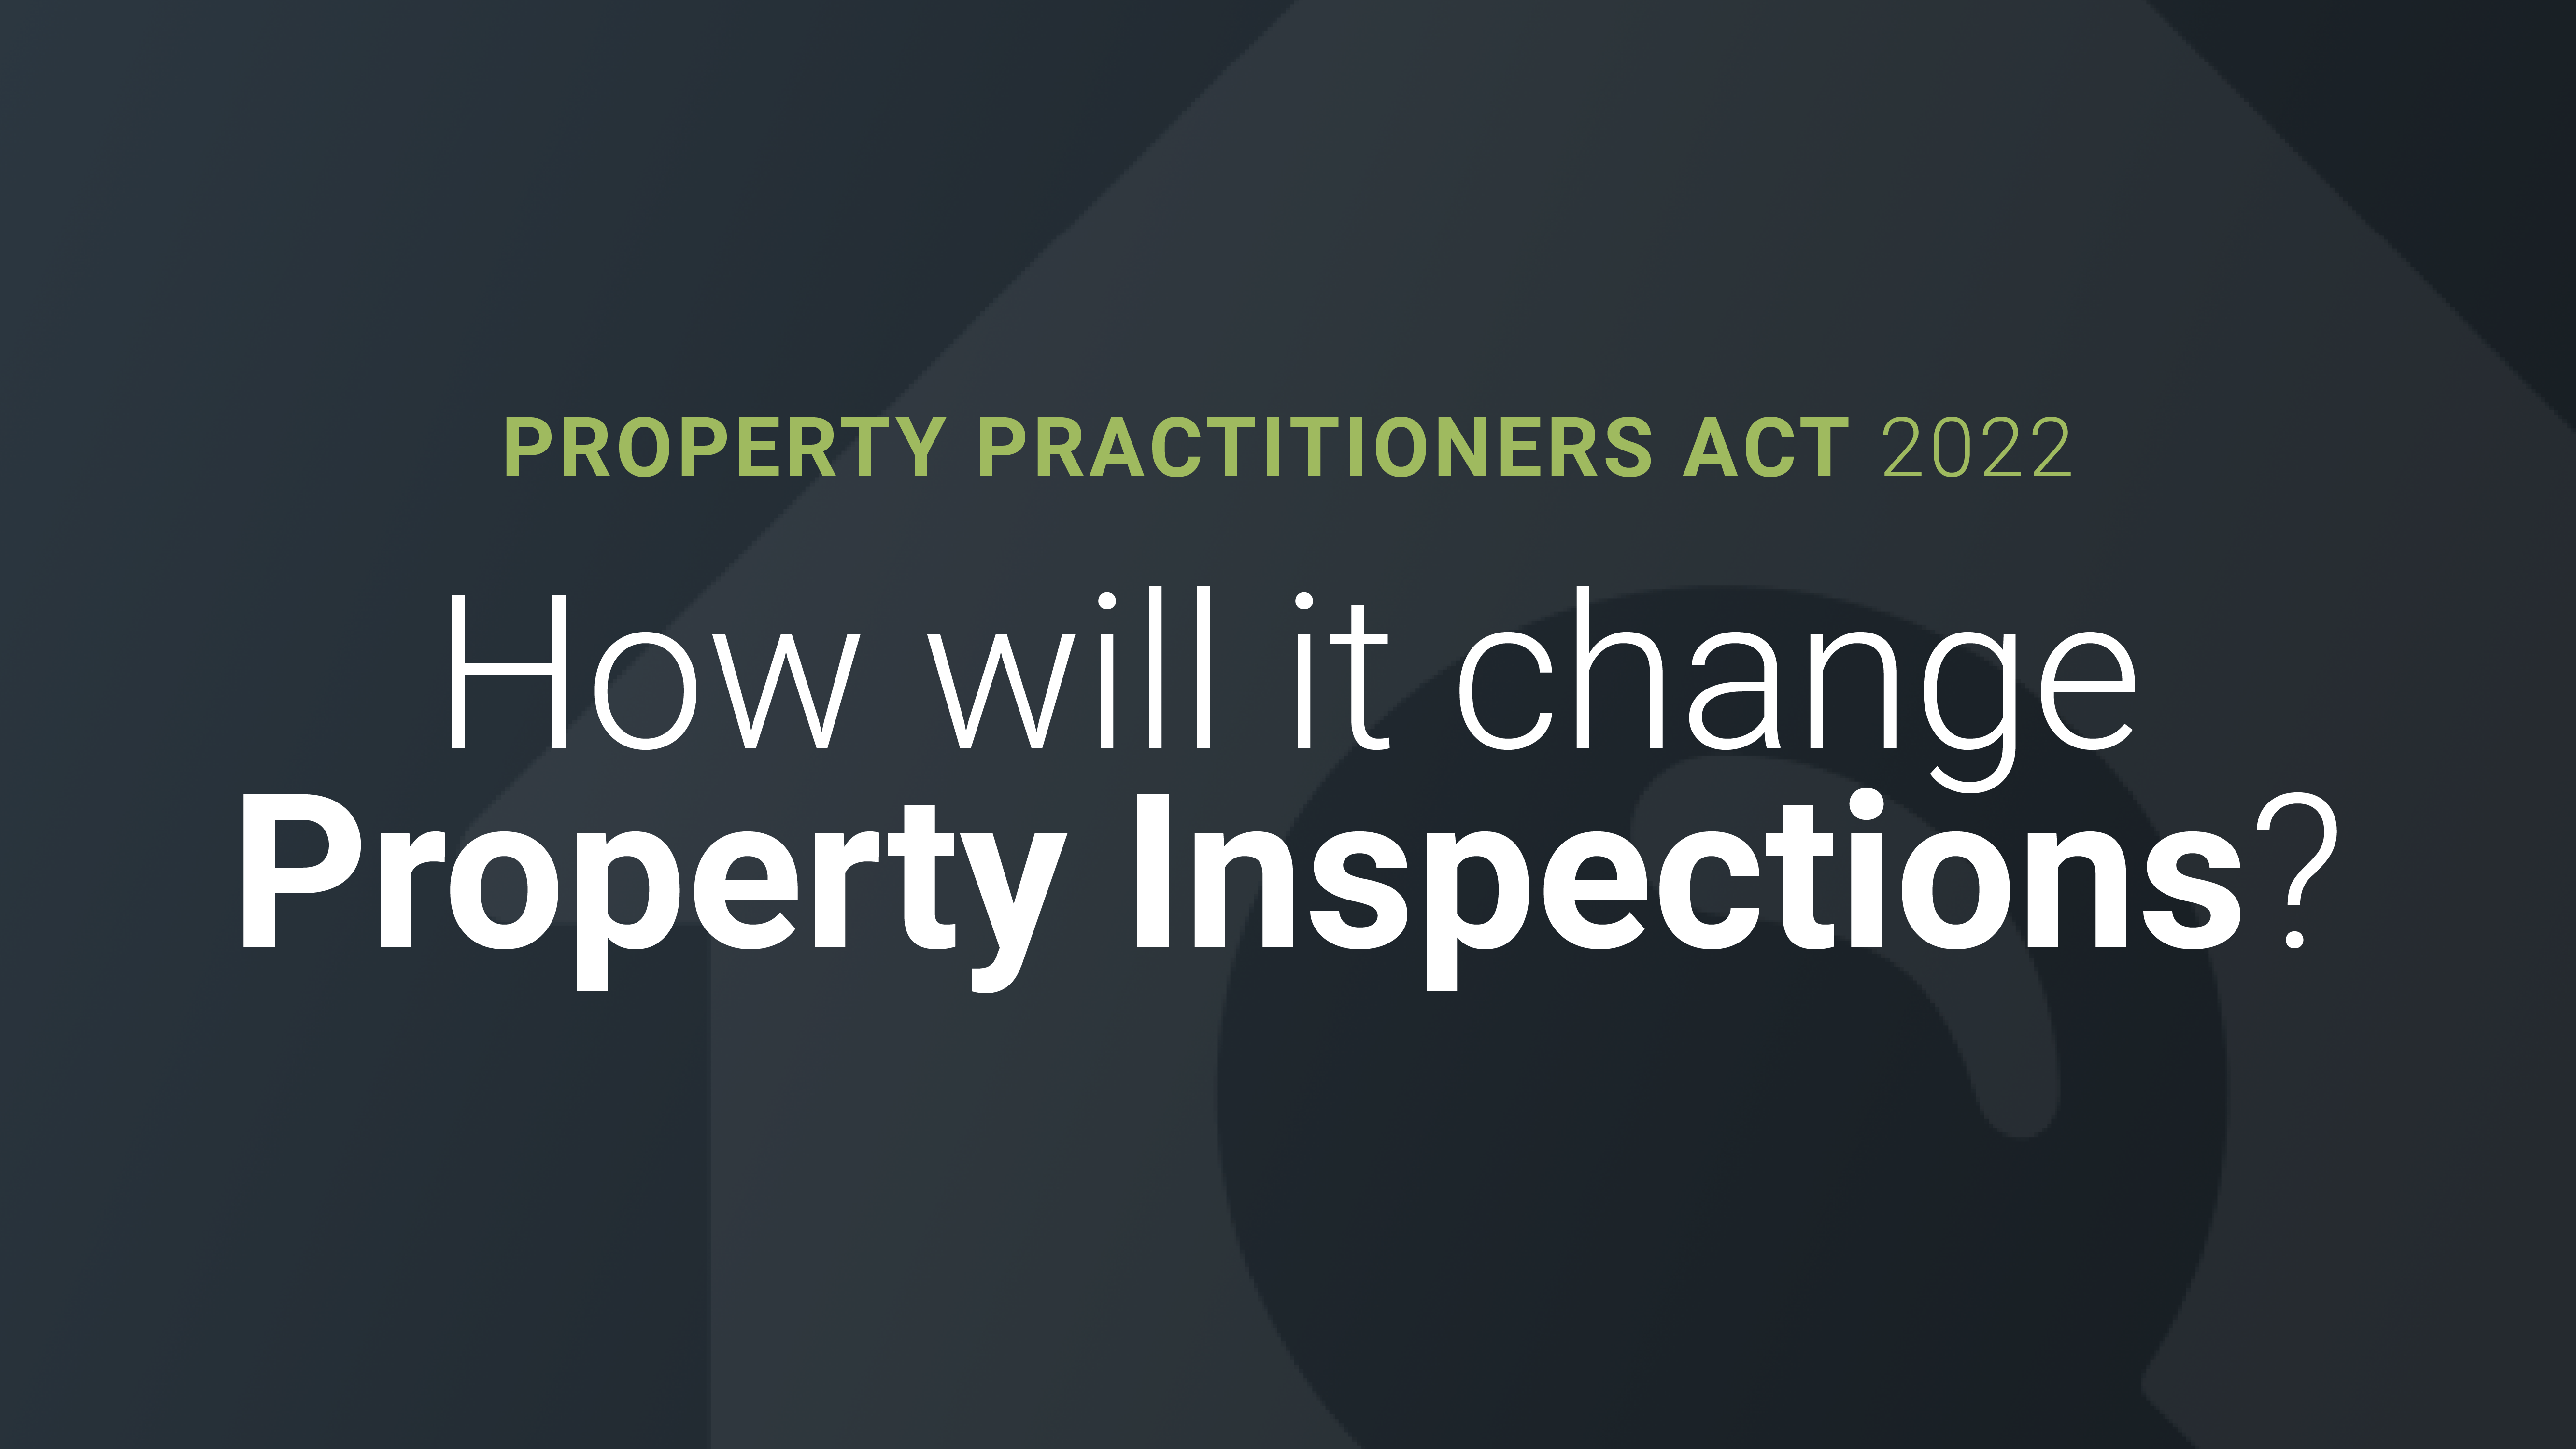 What is the Property Practitioners Act and How Will it Change Inspections in South Africa?